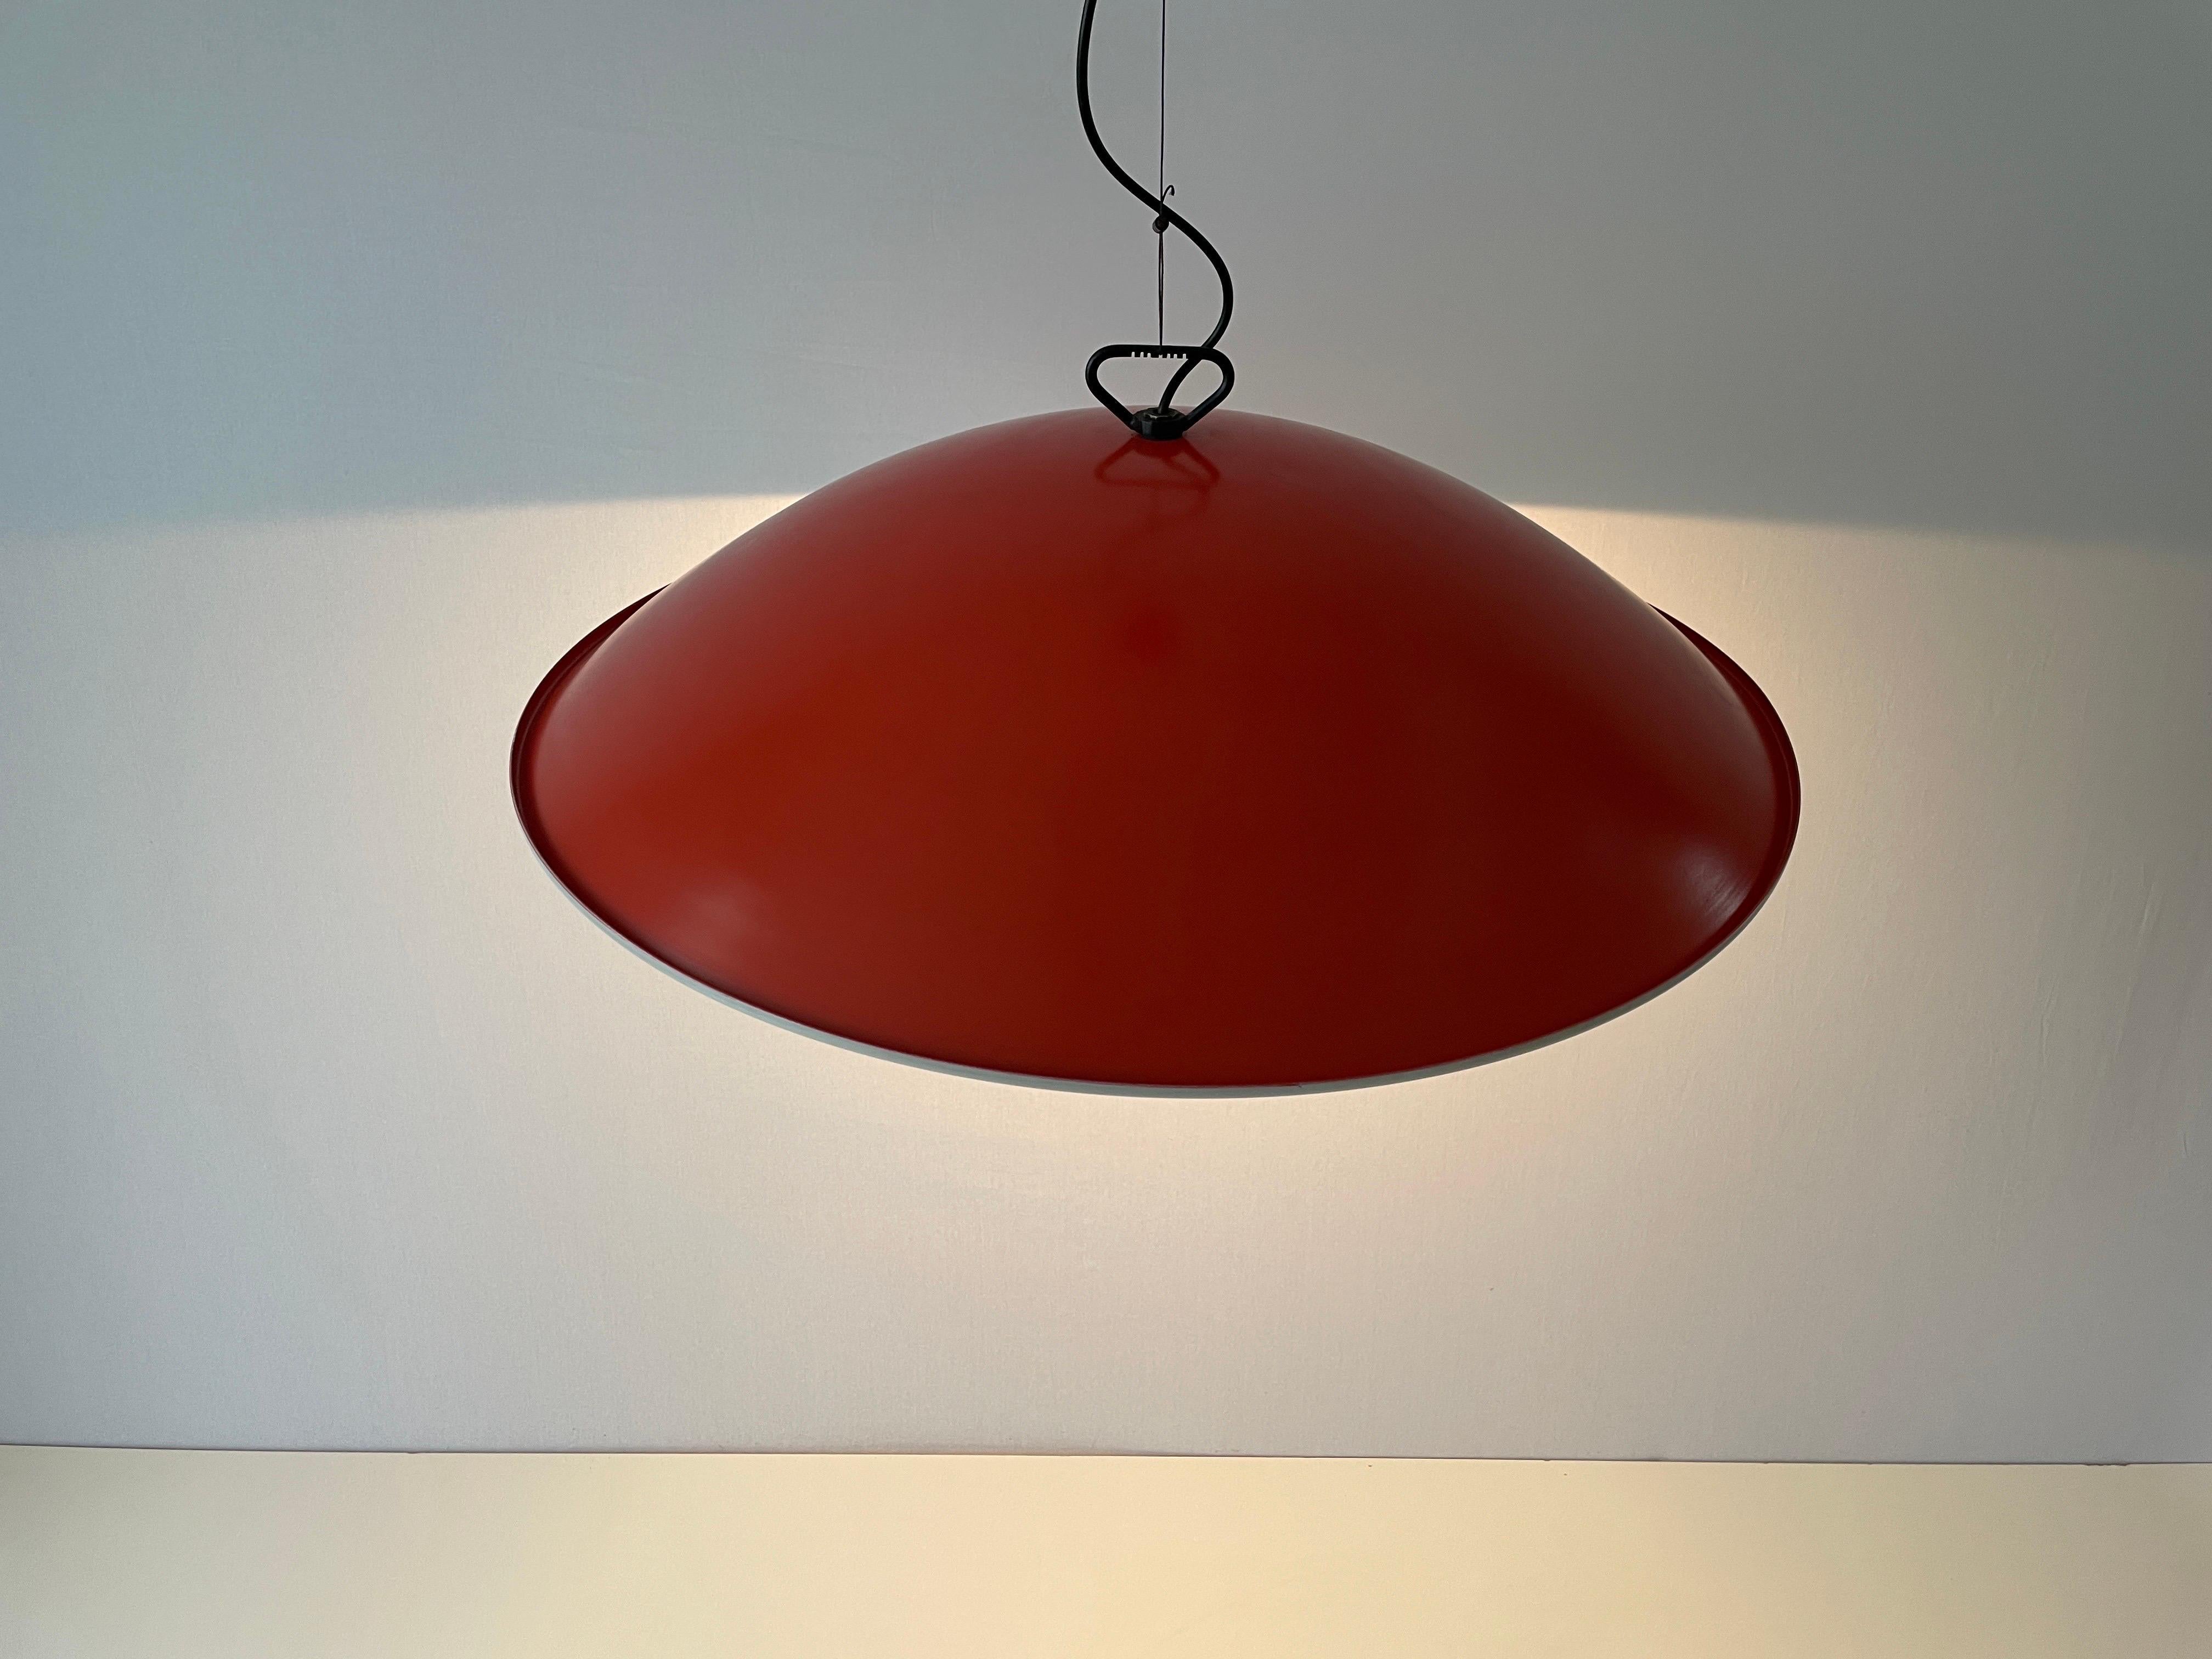 XXL Orange and White Metal Large Hotel Pendant Lamp, 1960s, Italy For Sale 4